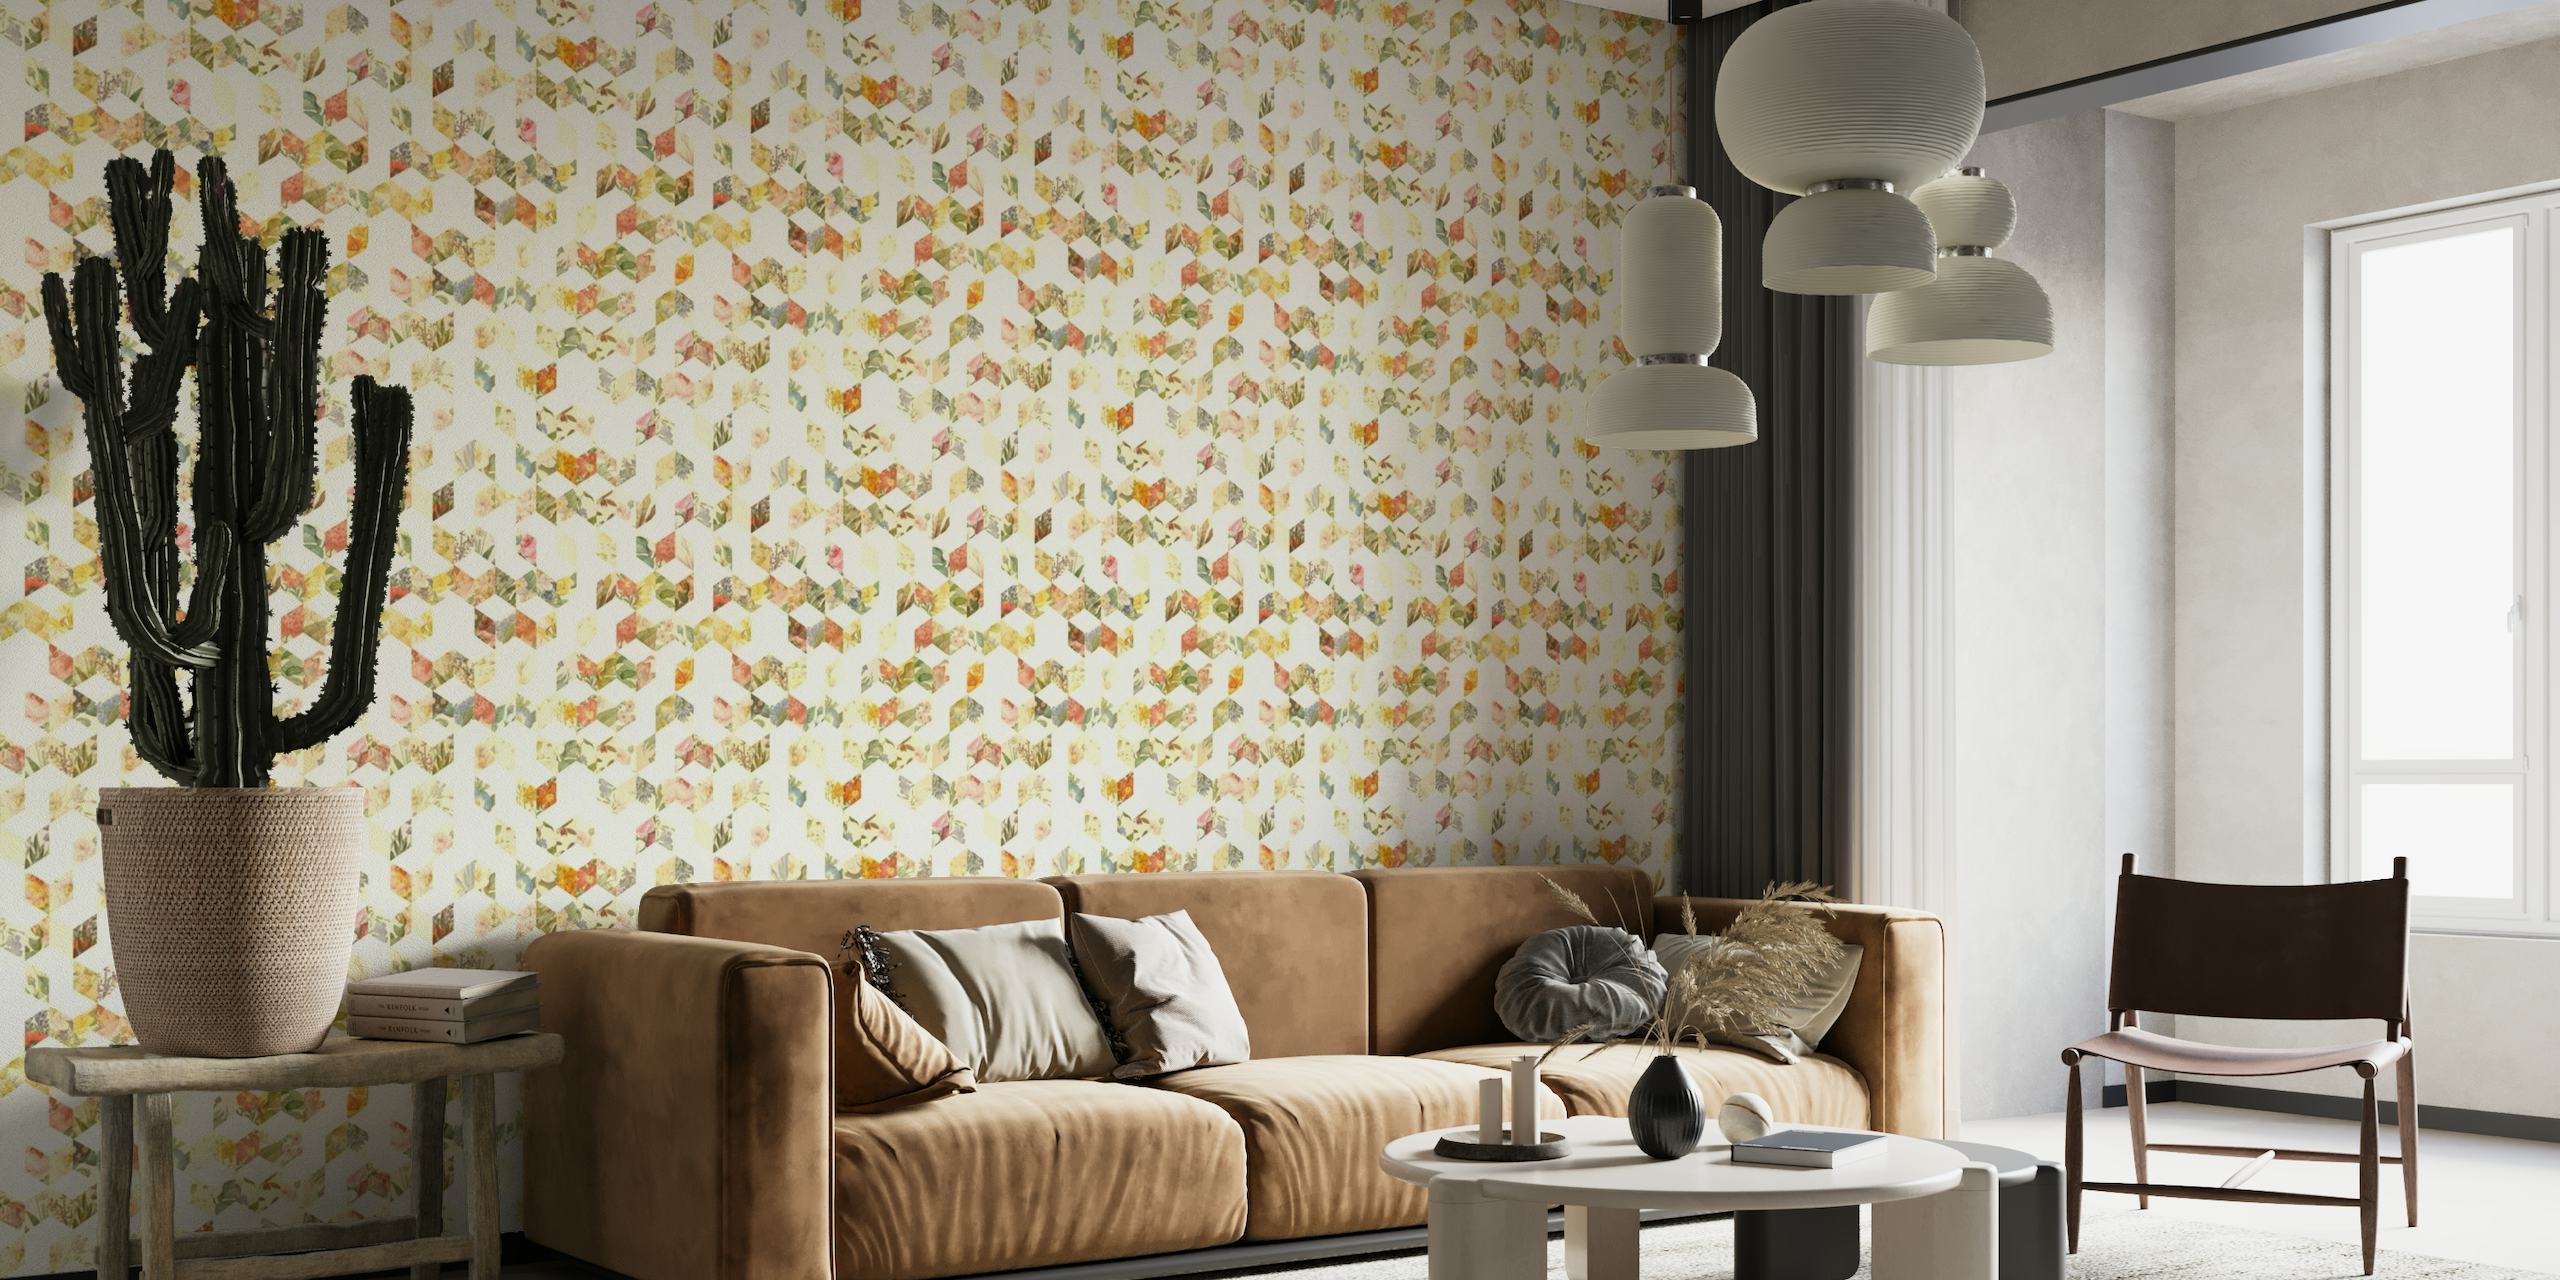 Geometric floral mosaic wall mural with soft pastels